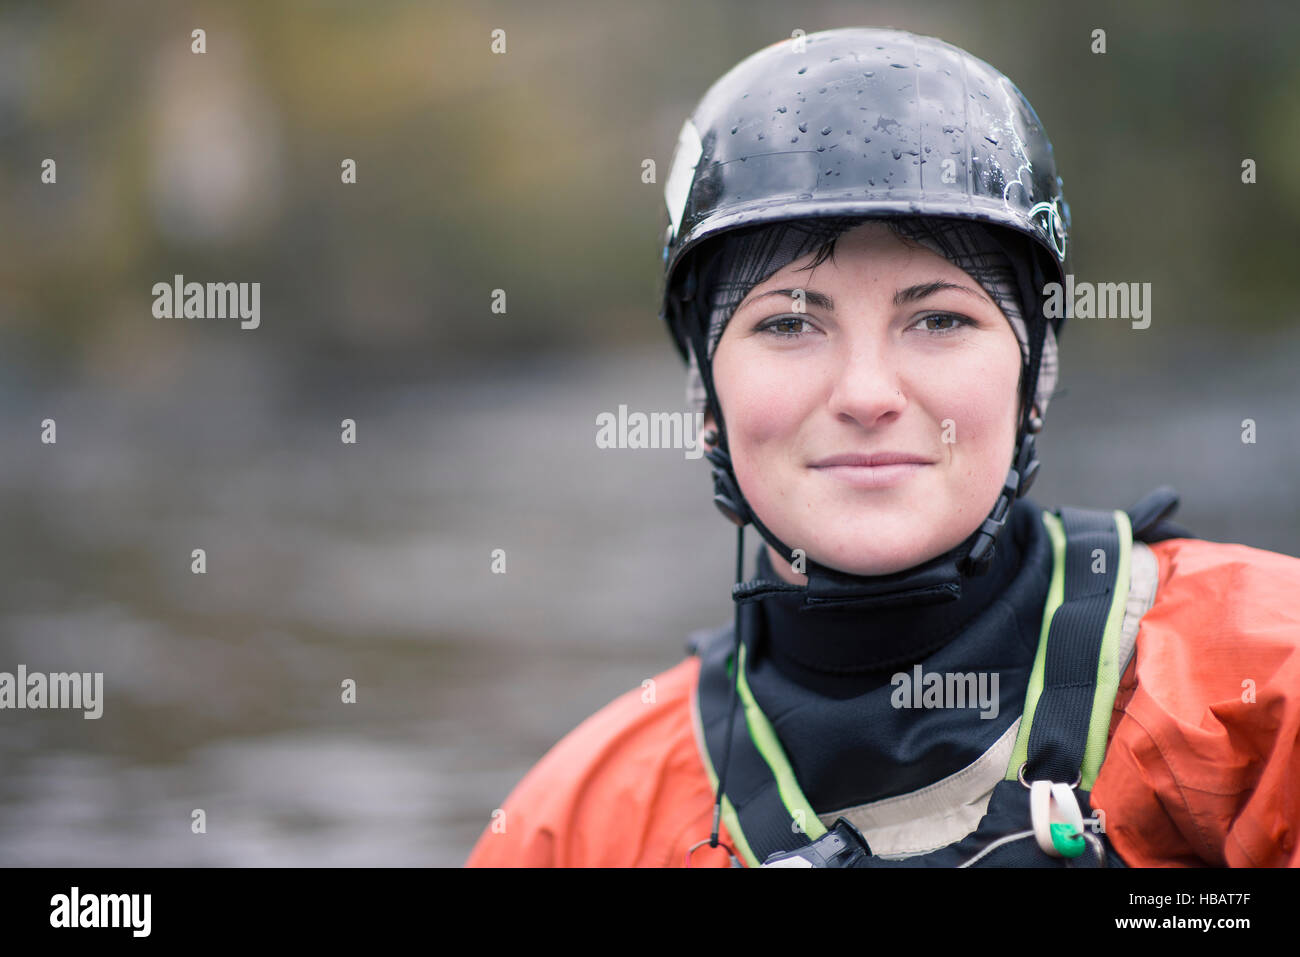 Portrait of young female kayaker in watersports helmet Stock Photo